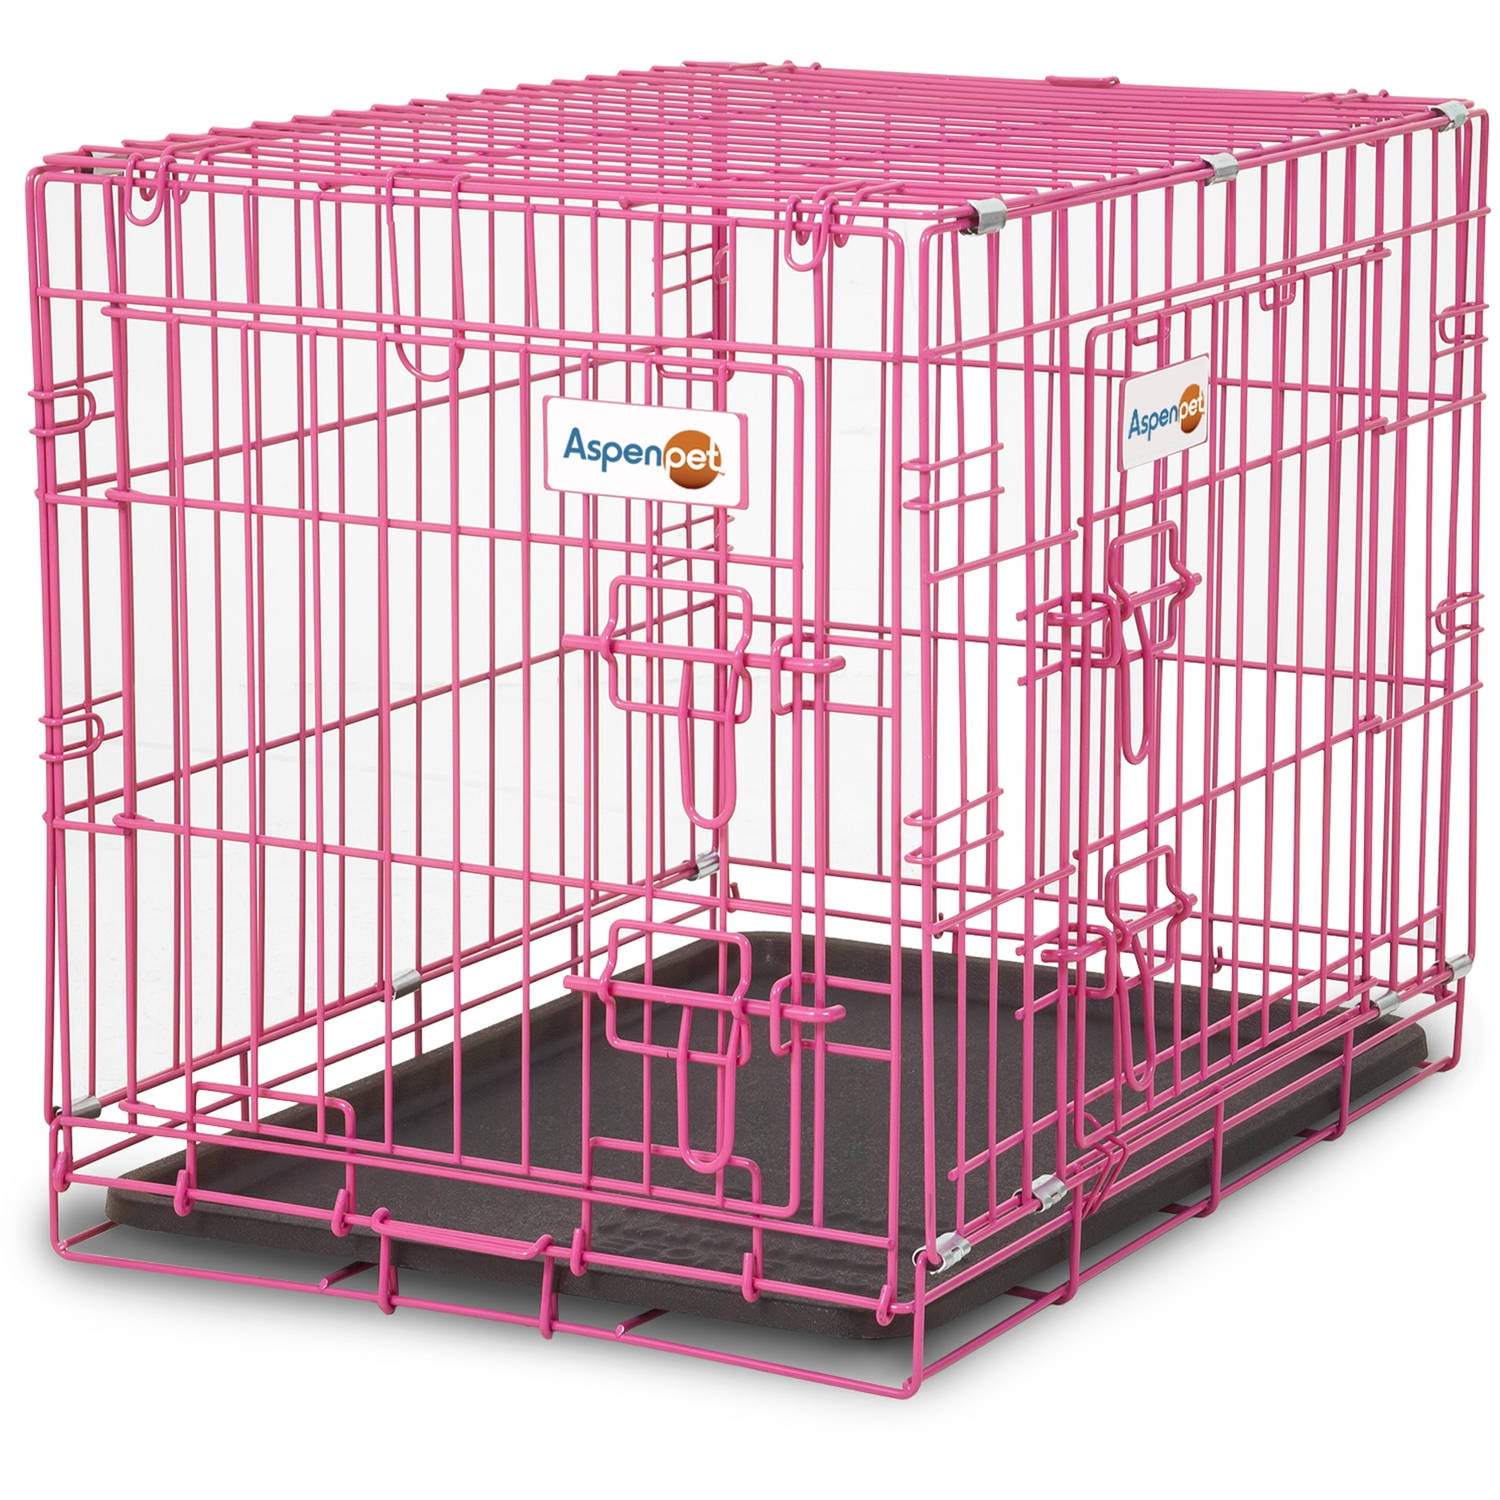 Balacoo Metal Dog Crate Cage with Toilet for Small Medium Dog Cat Cage Rabbit Puppy Pet Pink 35cmï¼‰ 